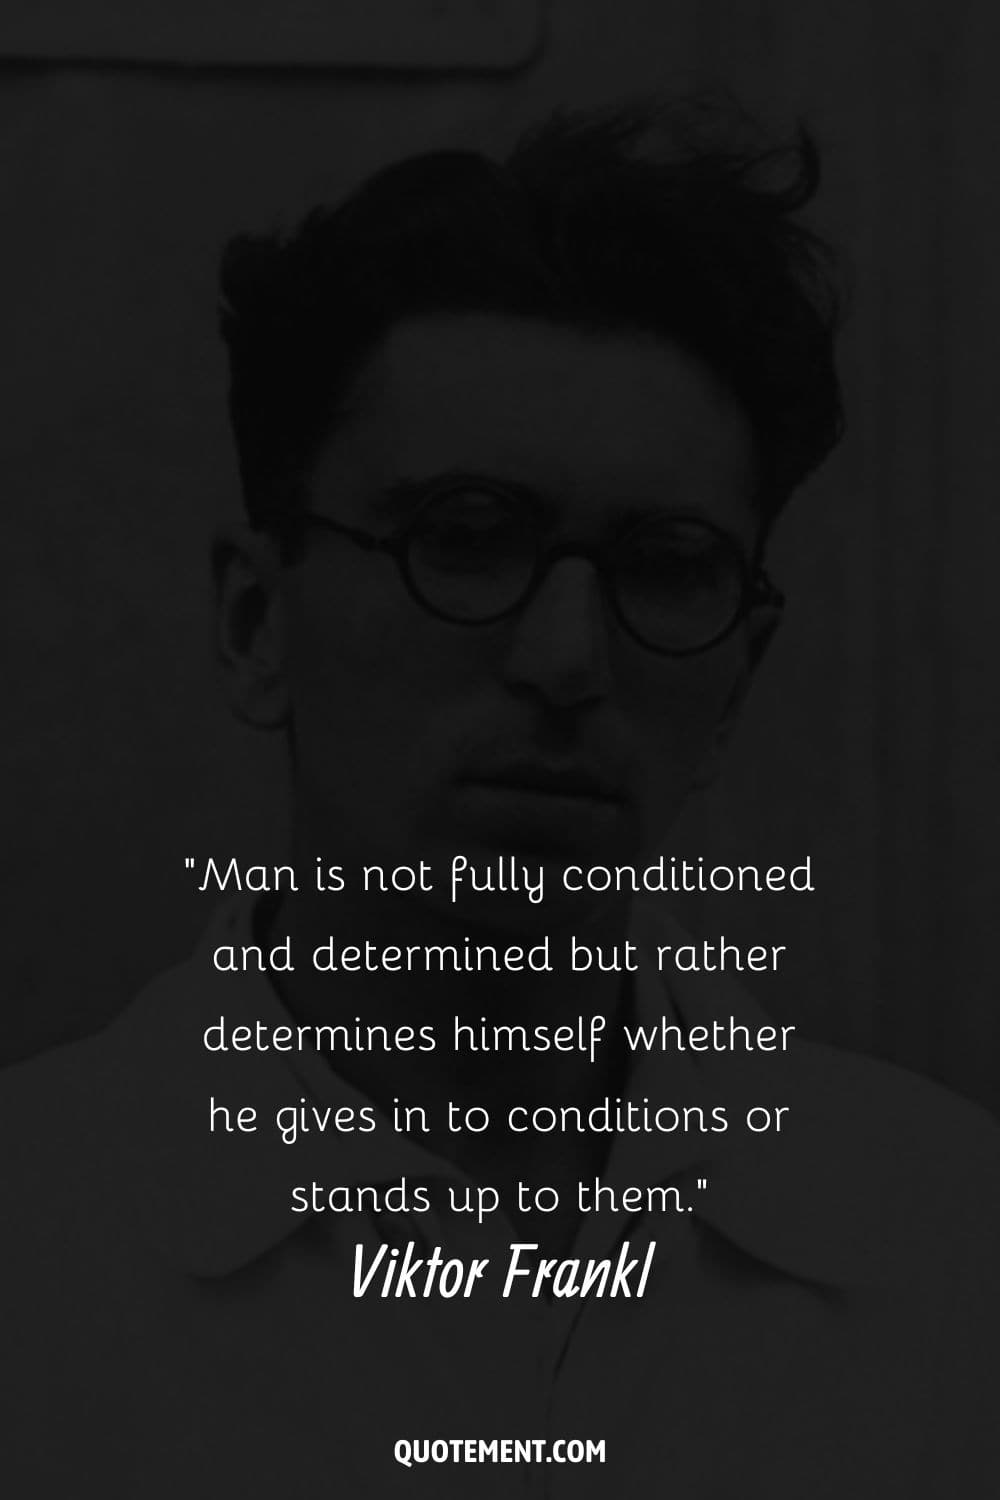 Image of Viktor Frankl wearing white representing quote about choosing.